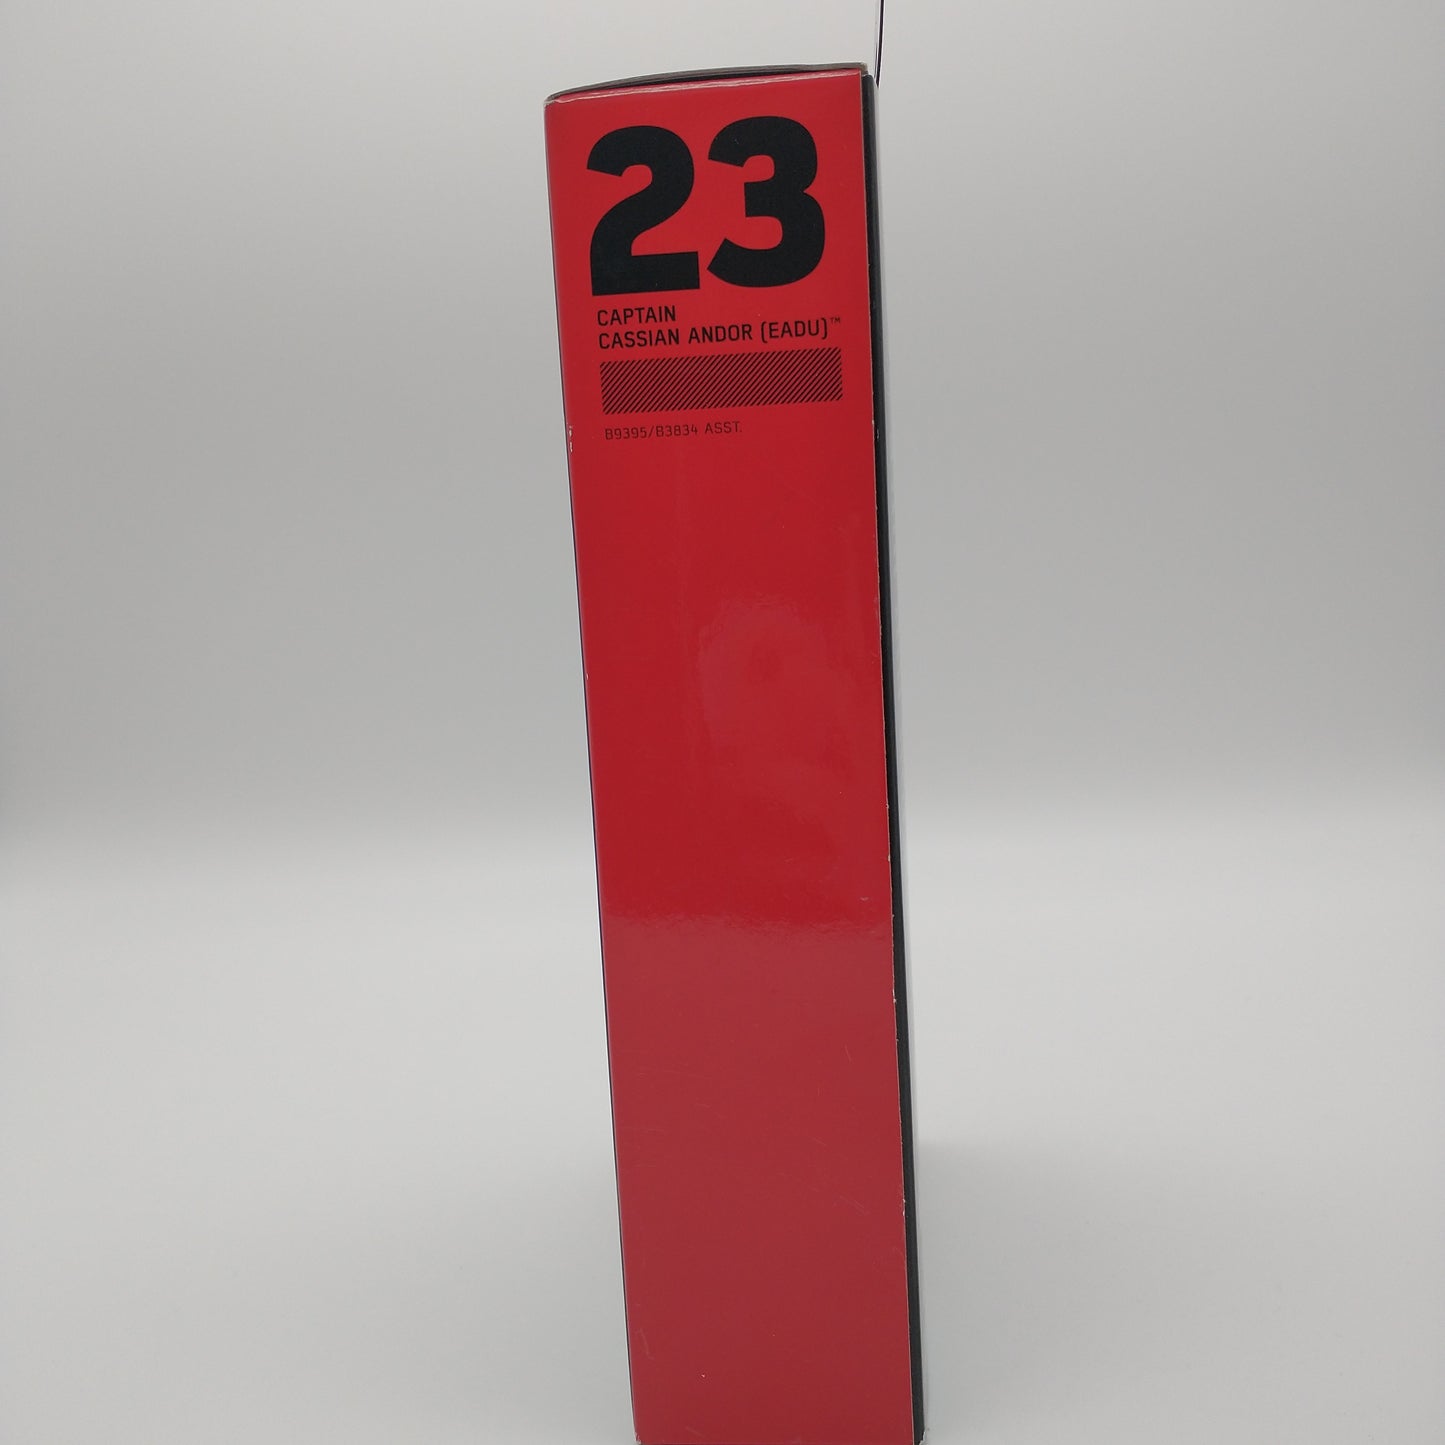 The side of the cart is red with the number '23' written in bold black letters at the top.